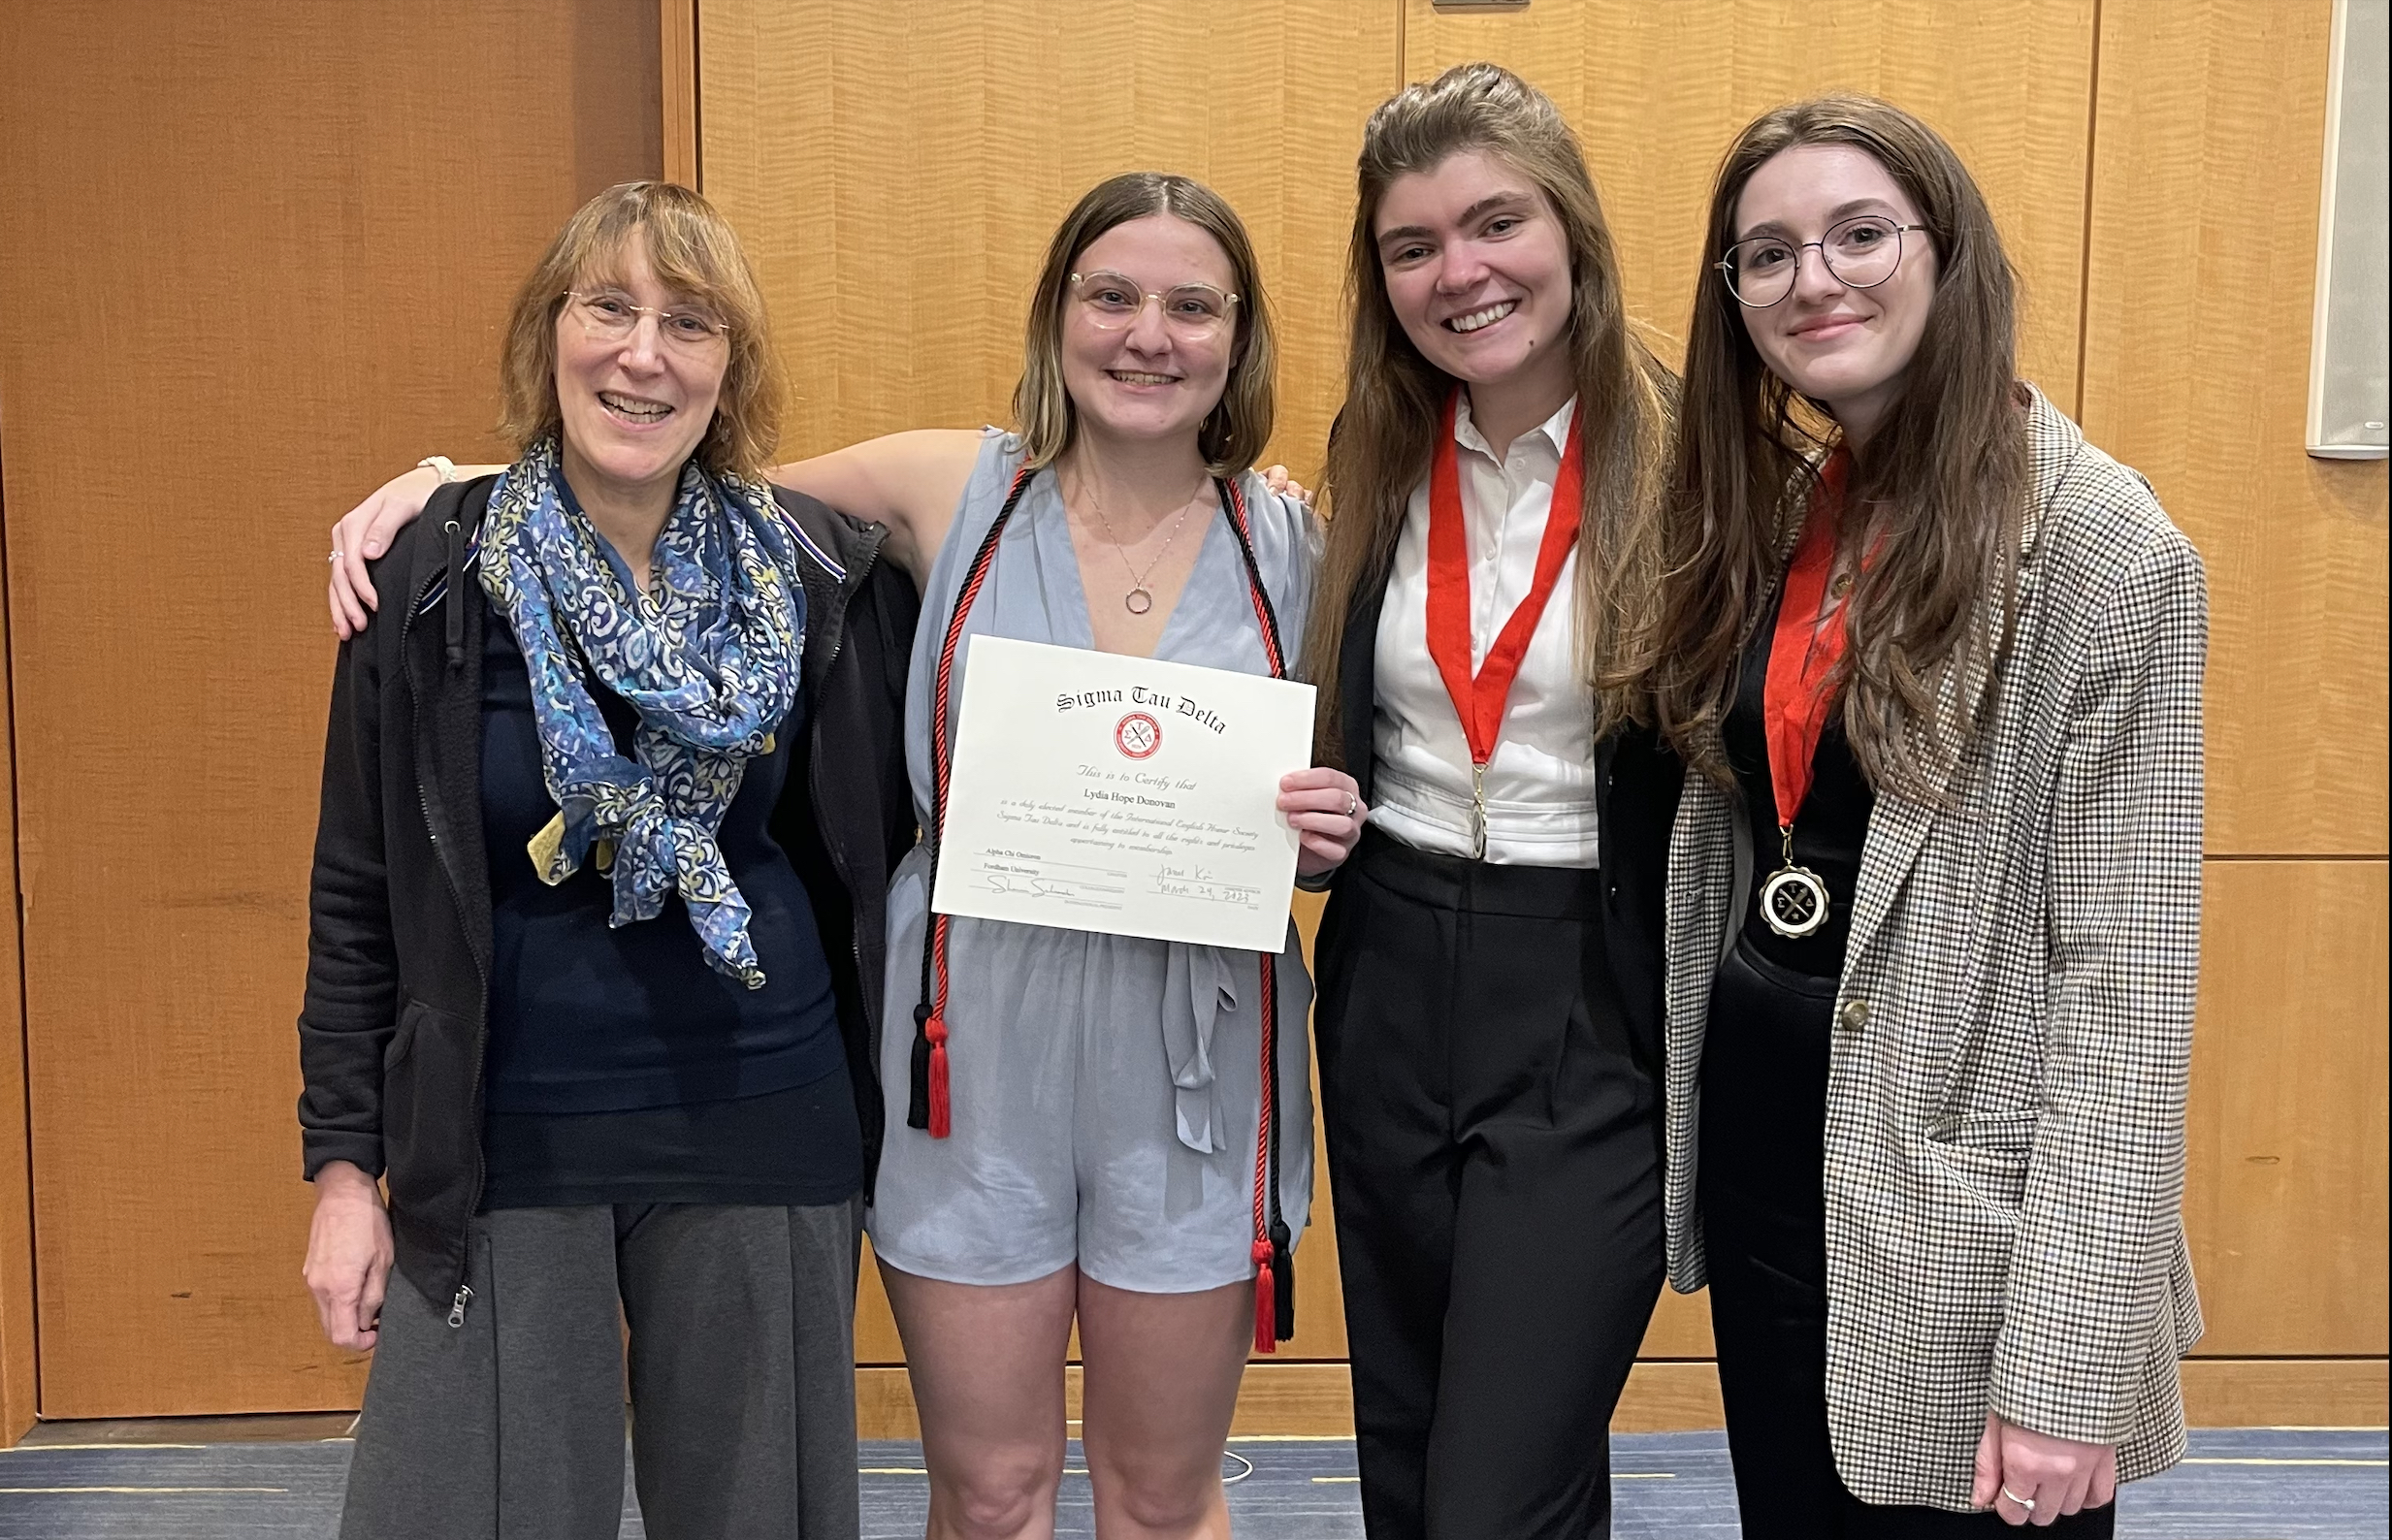 From left to right: Dr. Susan Greenfield, Lydia Hope Donovan, and AXO Co-Presidents Amanda Caputo and Kristine Saliasi at the 2023 Induction Ceremony